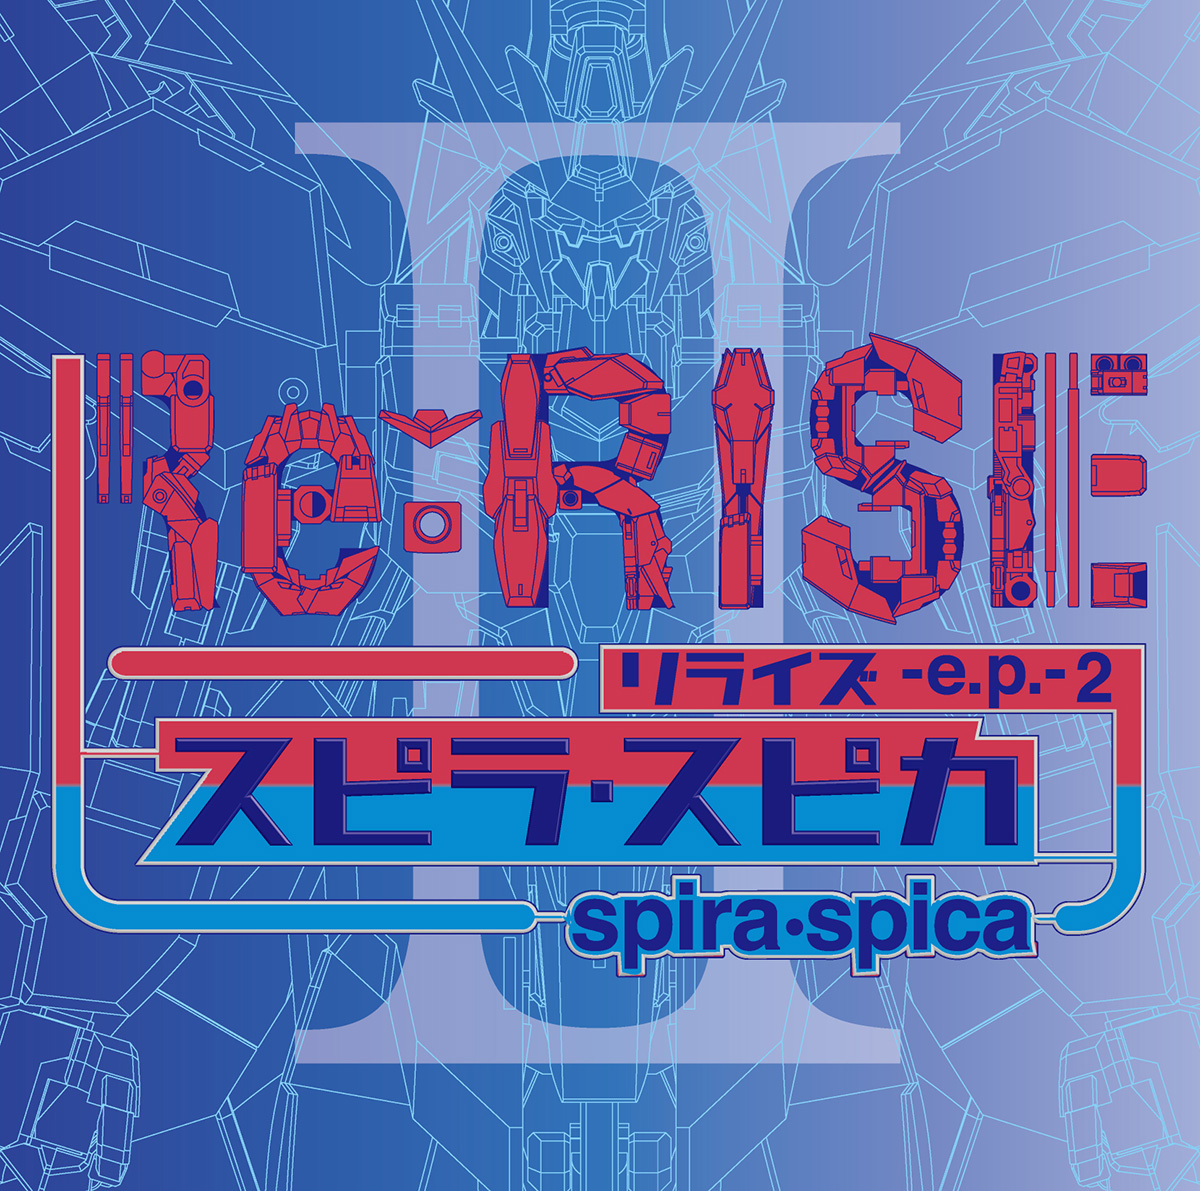 Cover for『Spira Spica - Twinkle』from the release『Re:RISE -e.p.- 2』